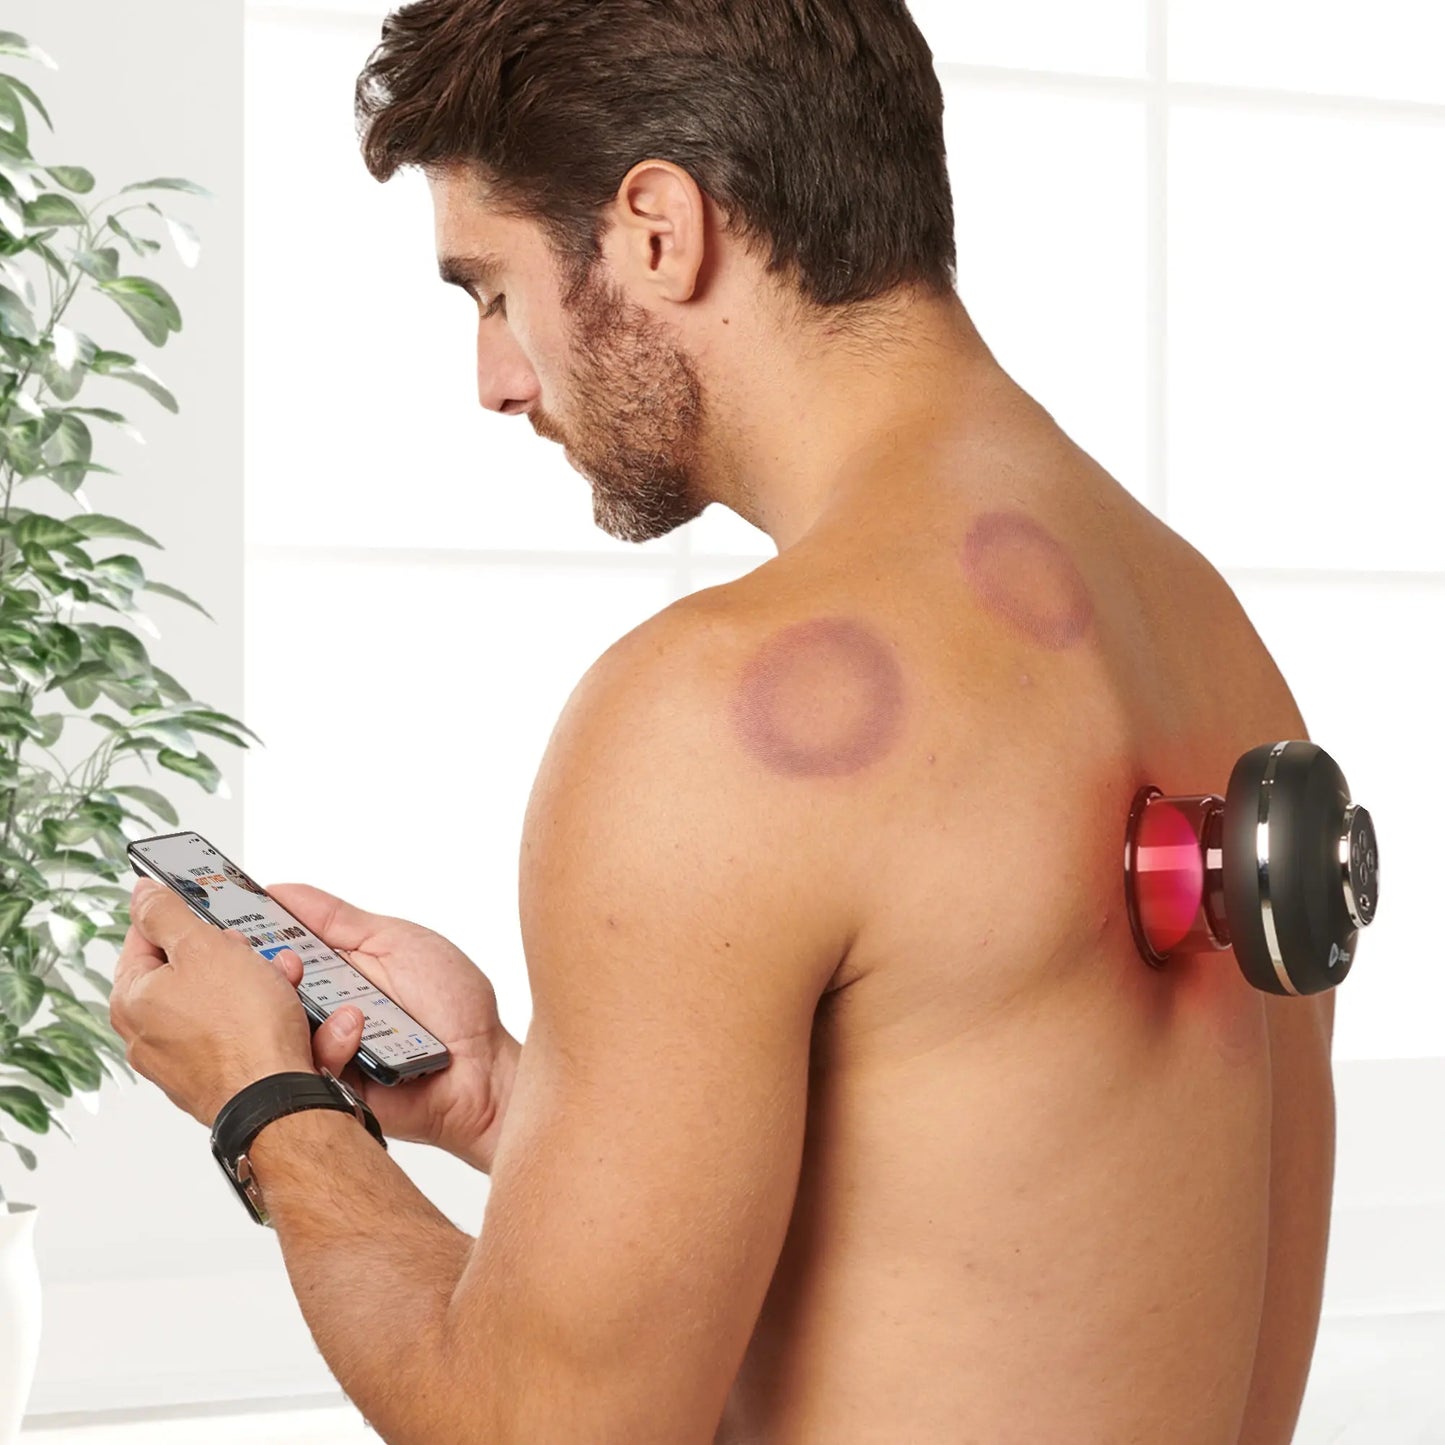 Relievacup Smart Cupping Device 